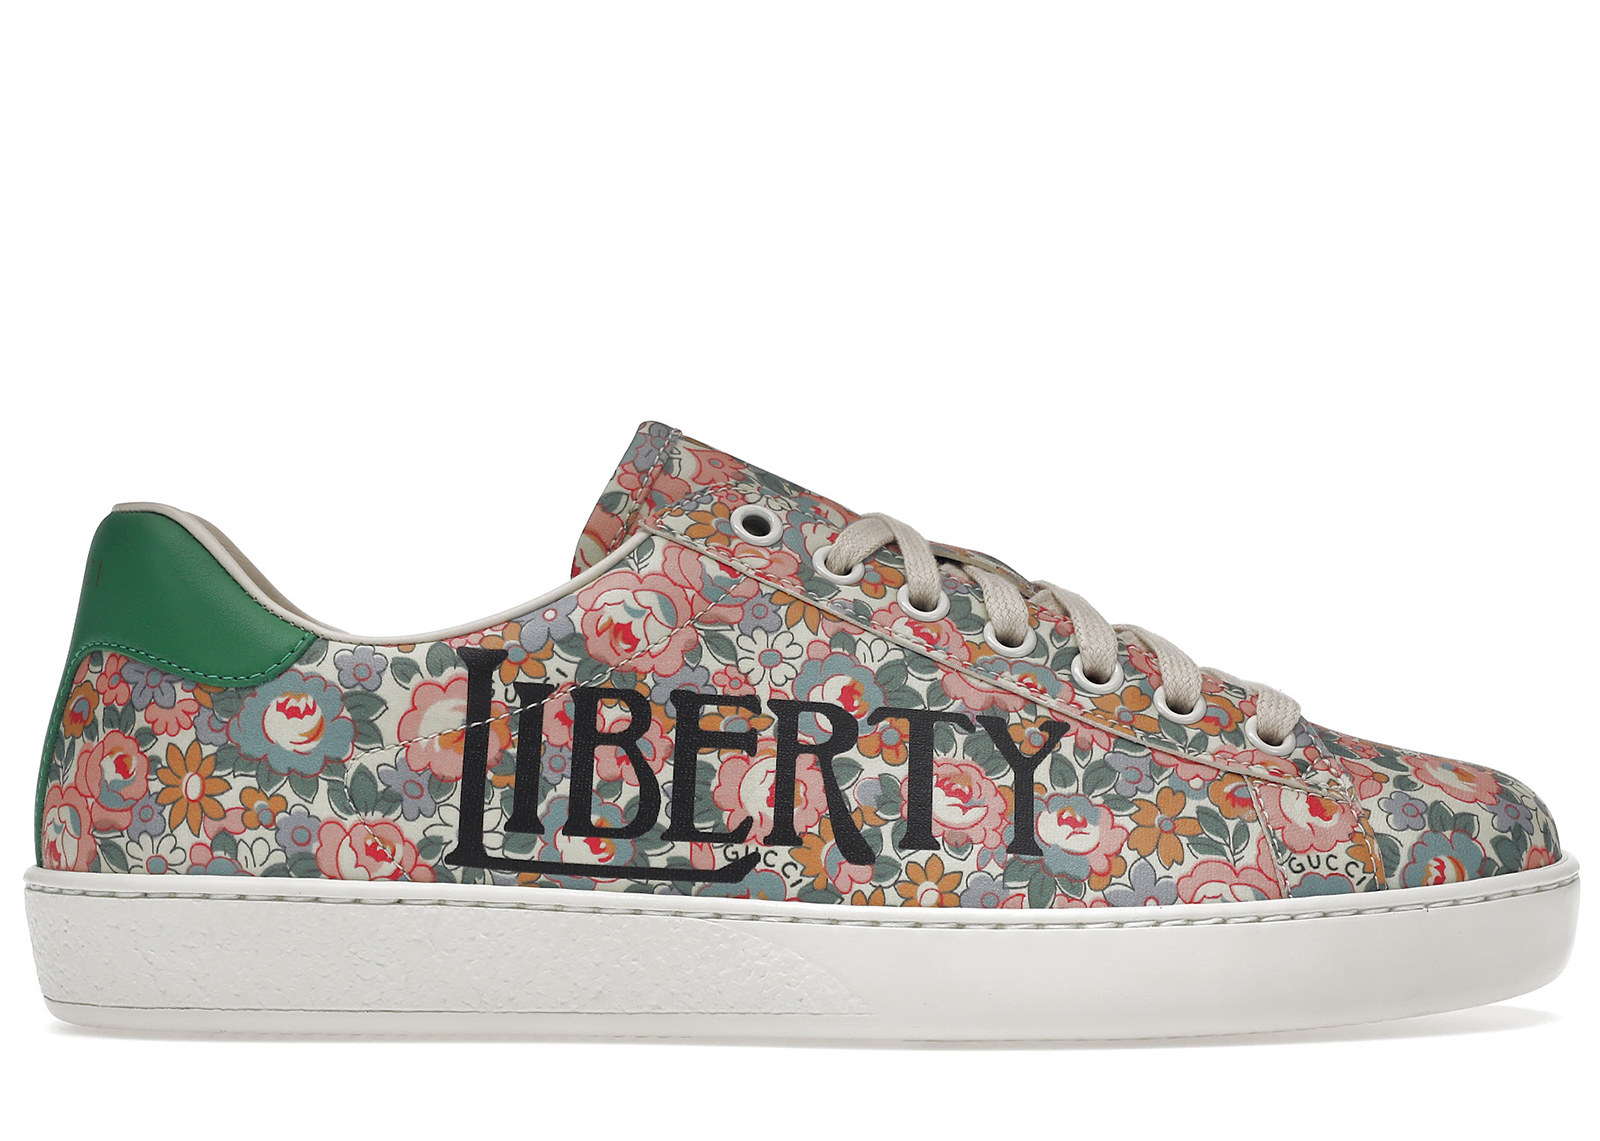 Sport Shoes for sports, sneakers for... - Liberty Shoes Ltd. | Facebook